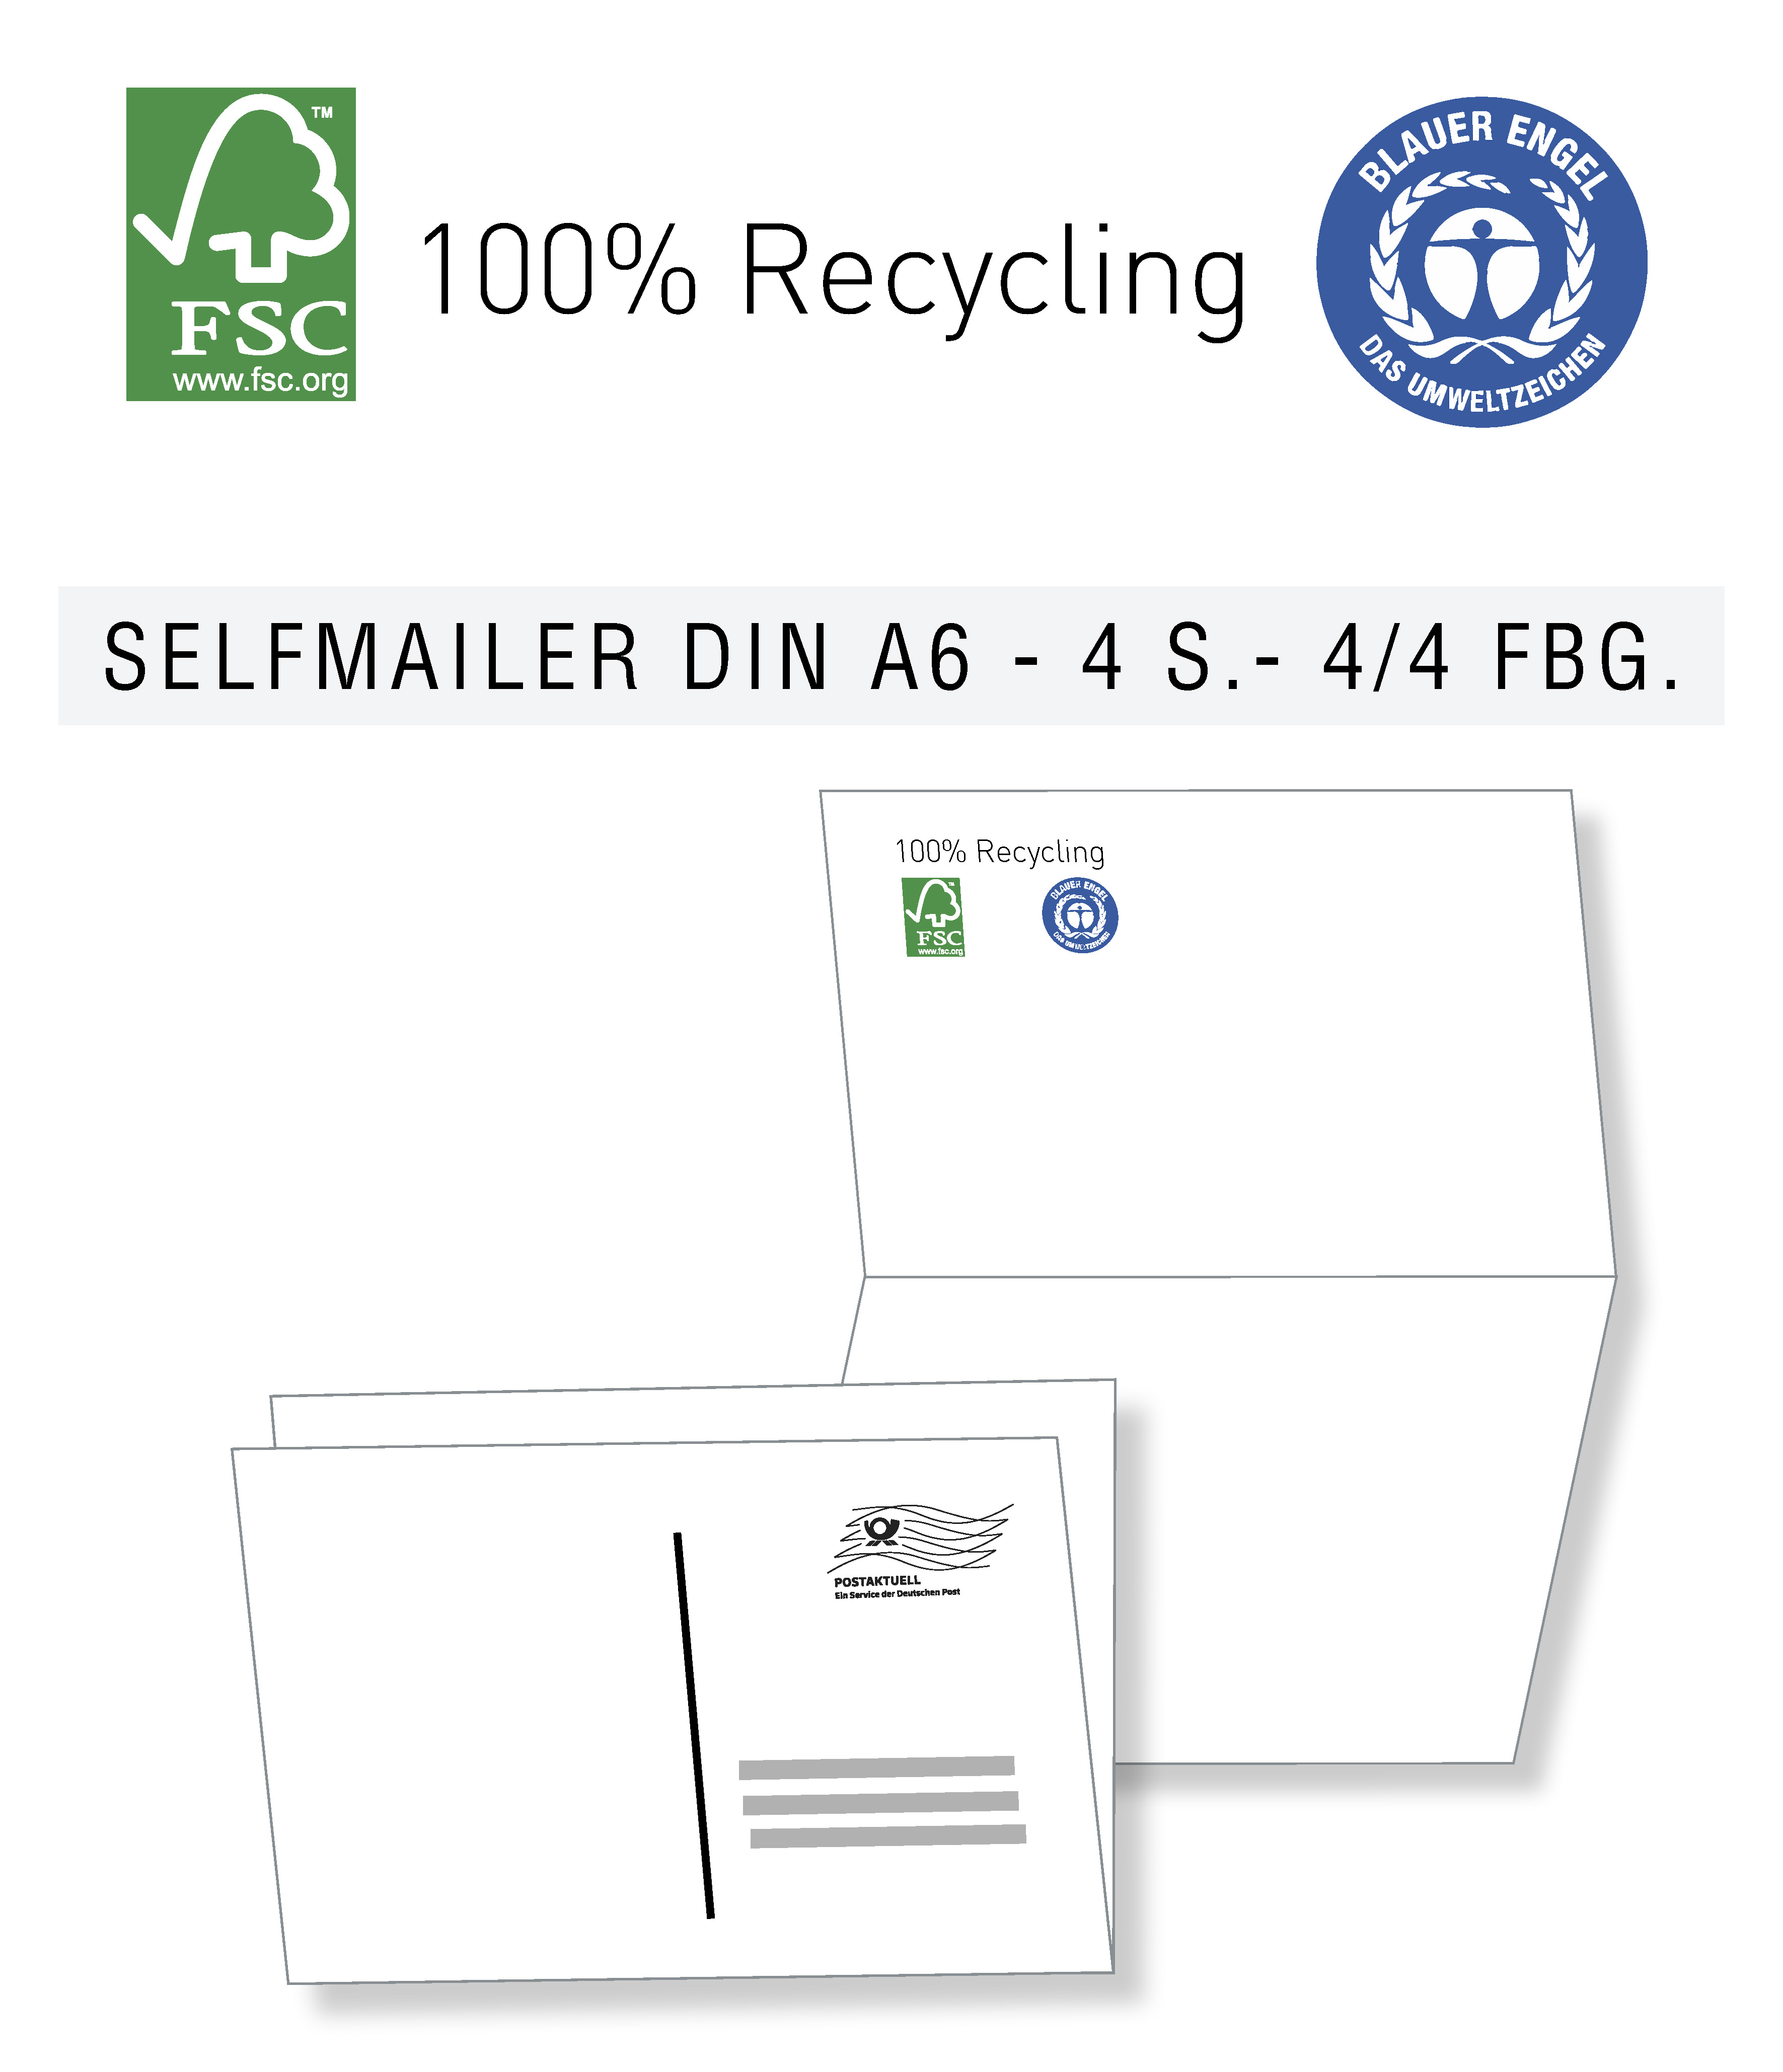 Recycling Selfmailer DIN A6